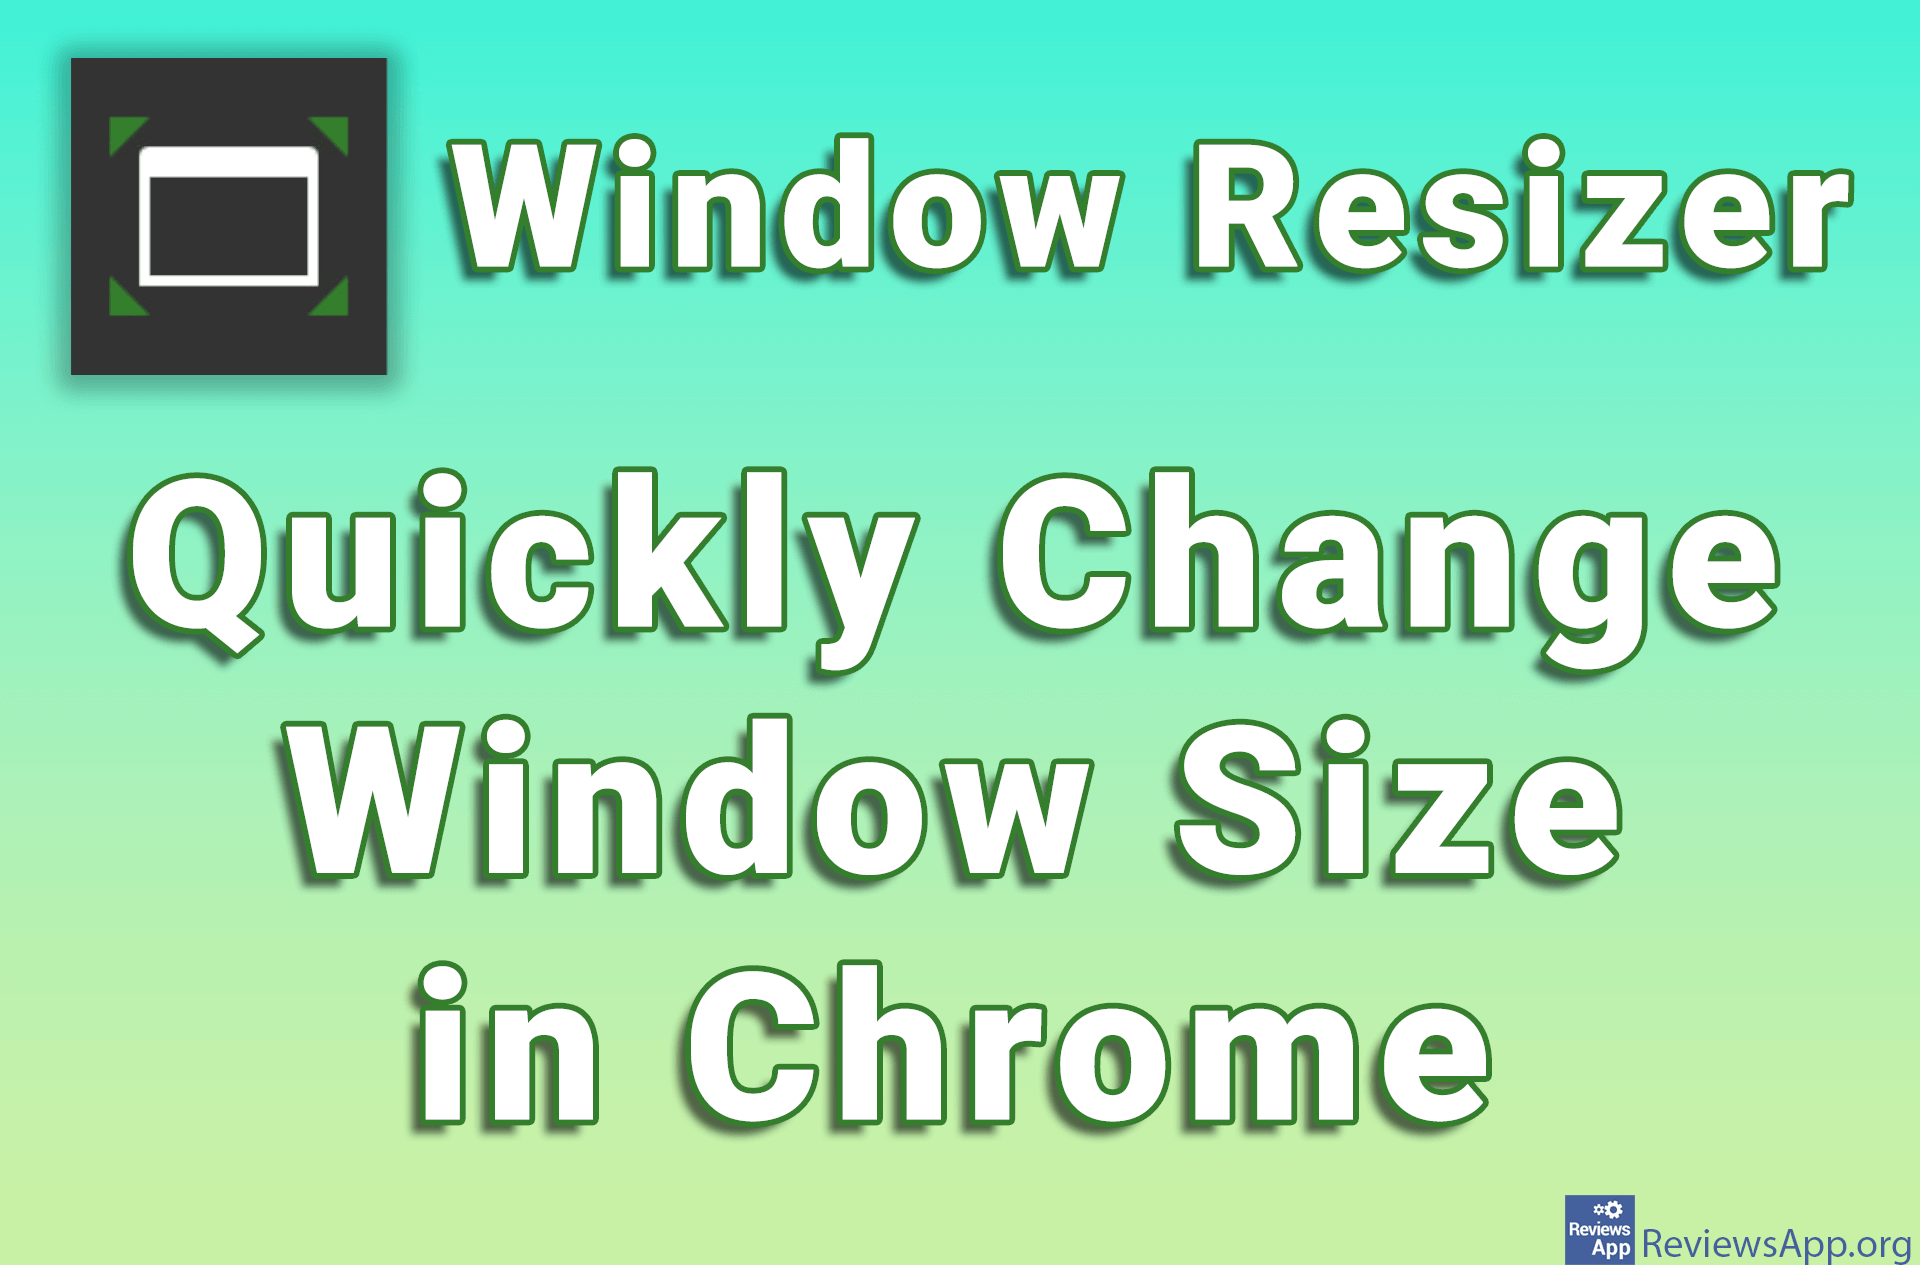 Window Resizer – Quickly Change Window Size in Chrome